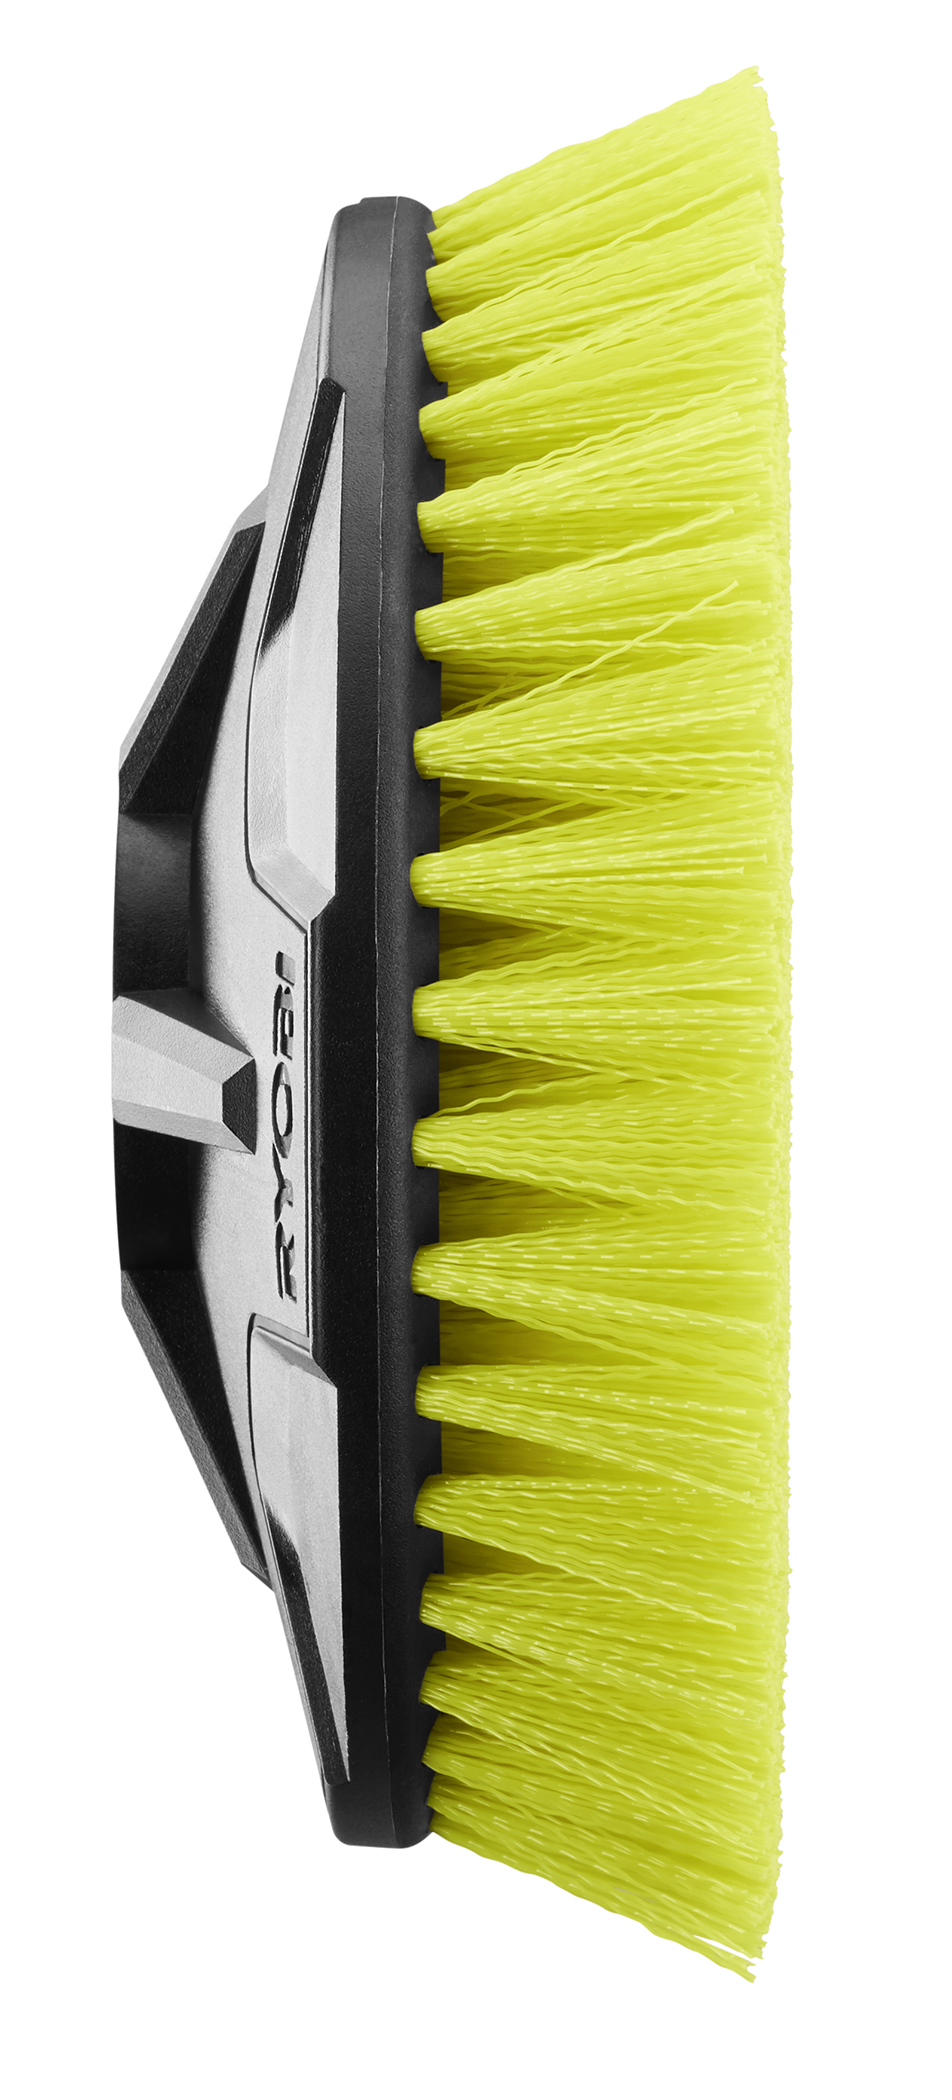 Drill Brush Power Scrubber by Useful Products Green-Orig-Green-2-4-Lim